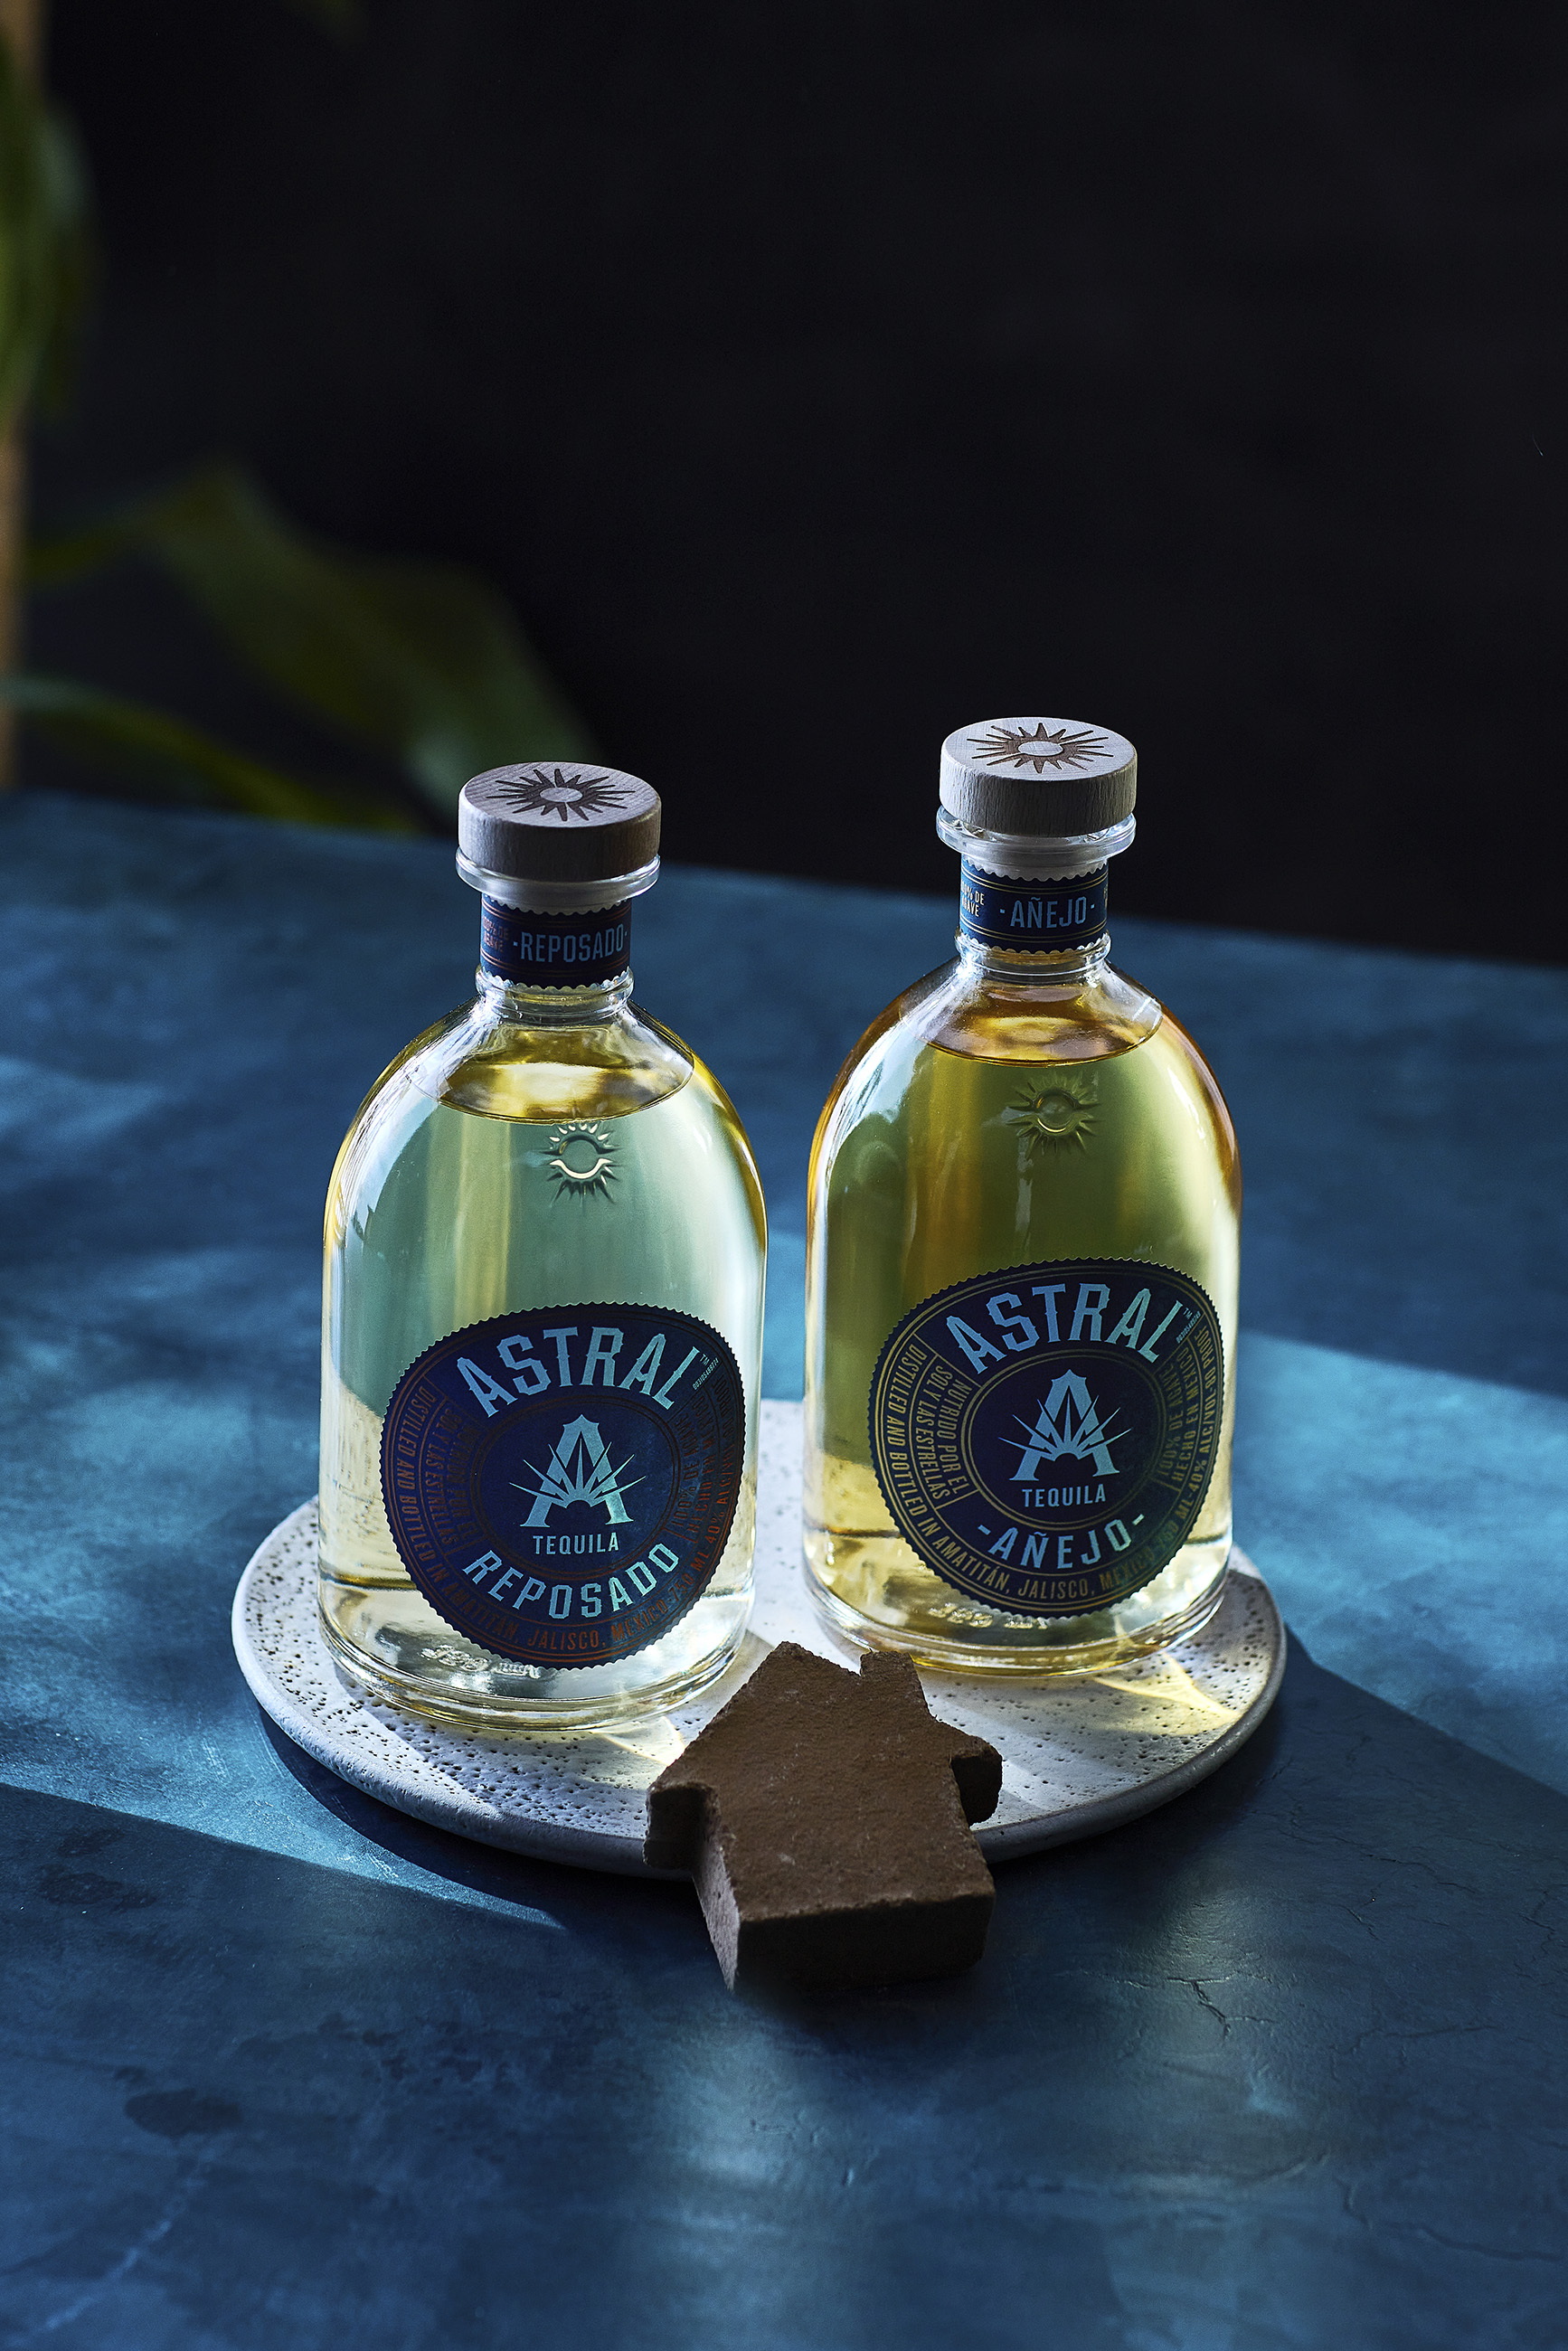 The launch of Astral Tequila Reposado and Añejo allows the brand to make even more adobe bricks from spent agave fibers, supporting our sustainability initiative, the Adobe Brick Project.